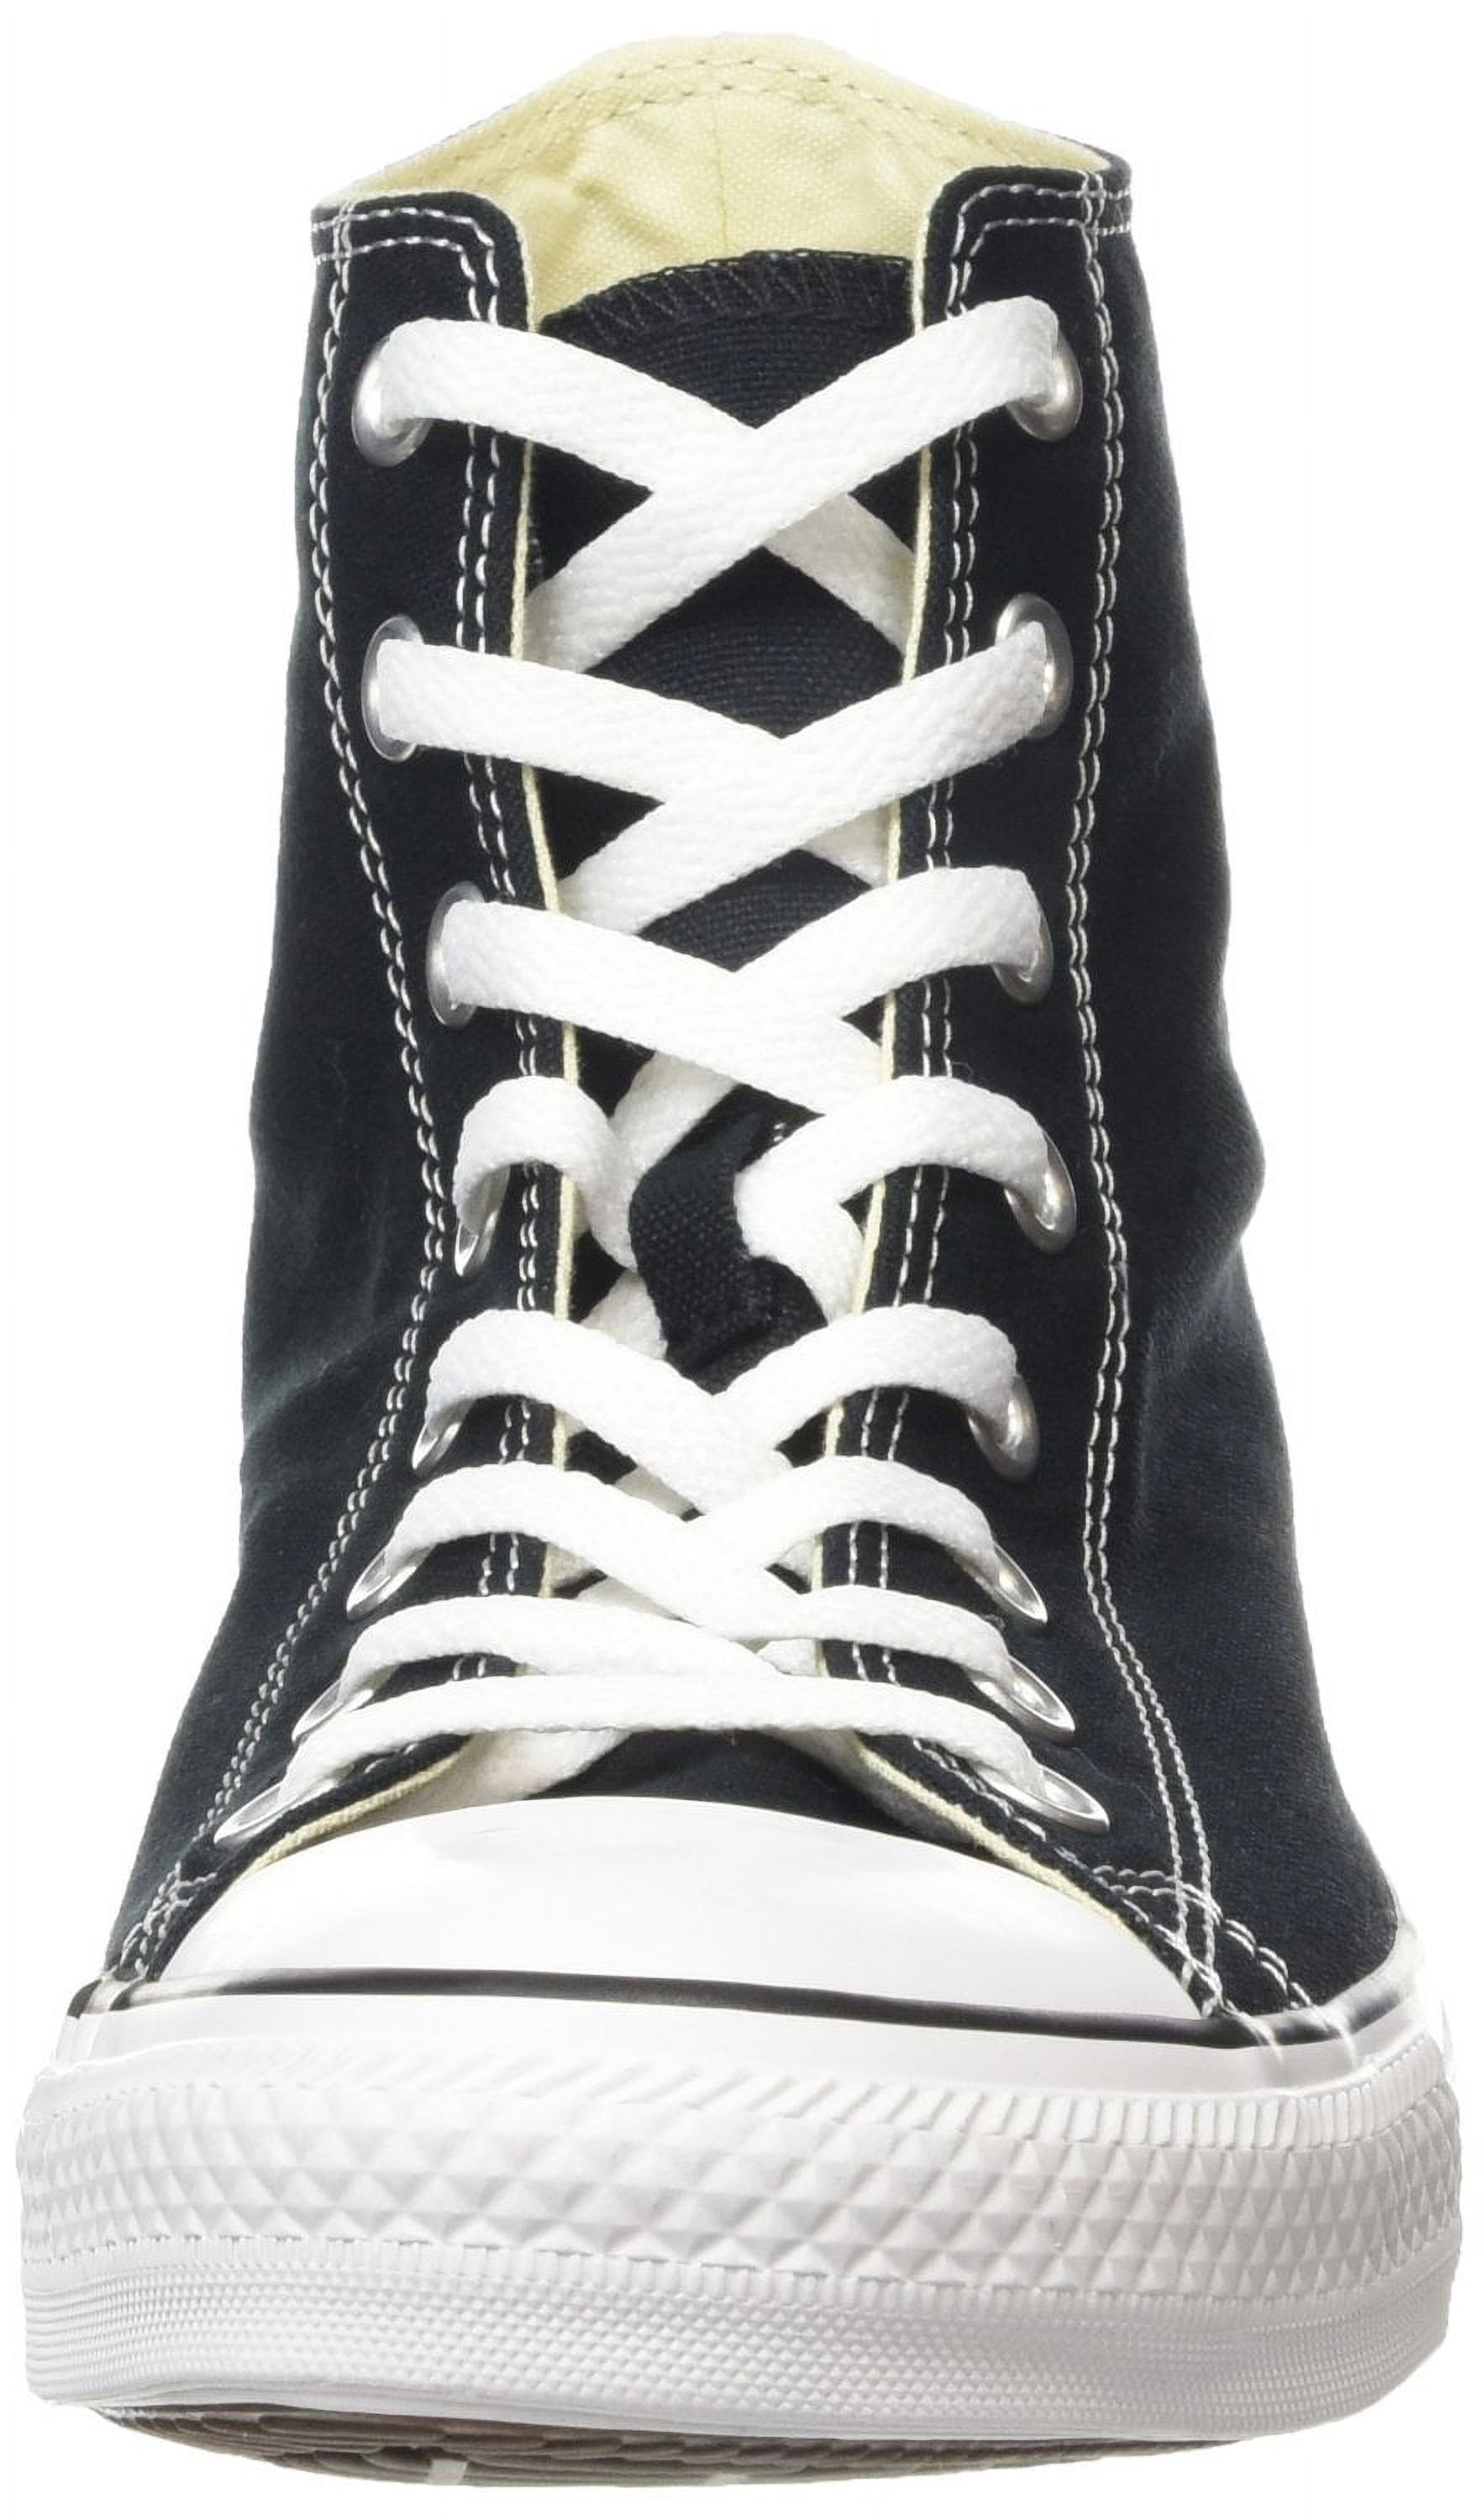 Converse Unisex Chuck Taylor All Star High Top - image 3 of 3